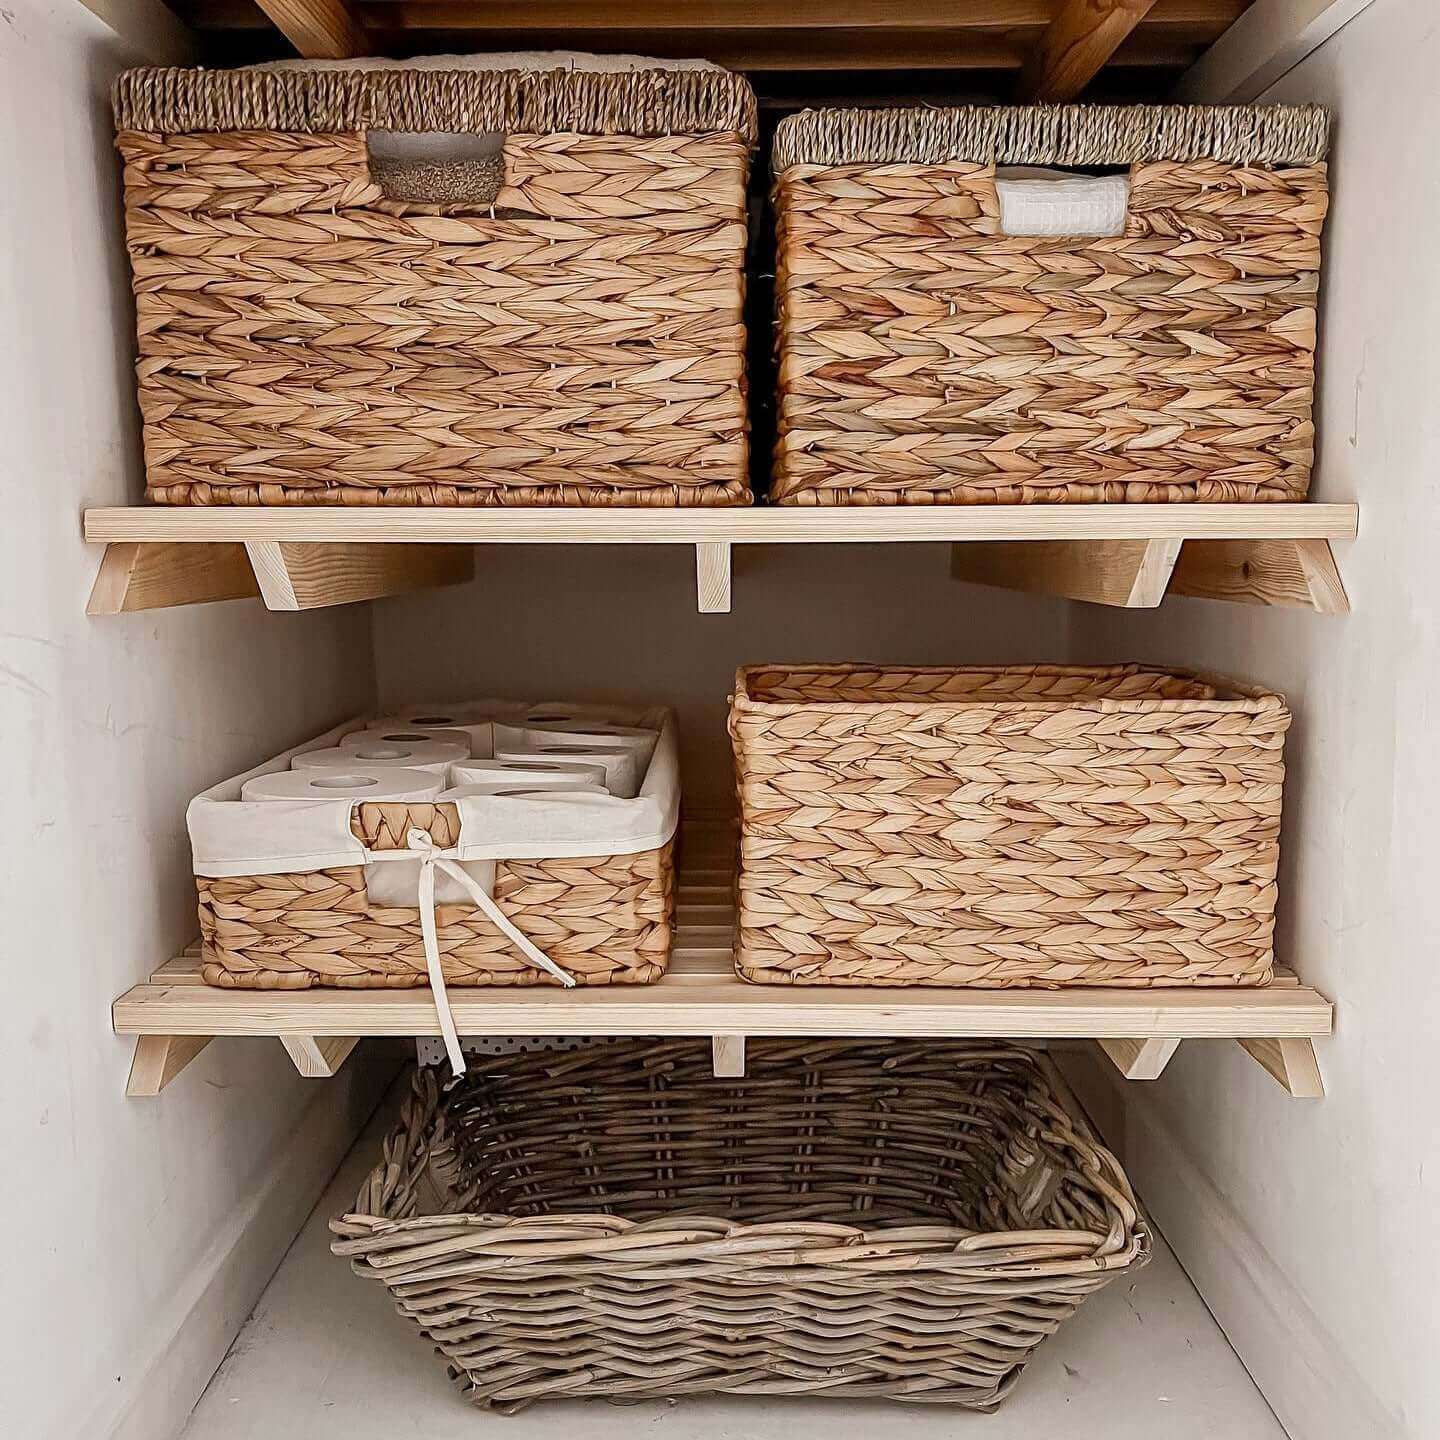 Airing Cupboard Wooden Slatted Shelves - 77 cm by 30 cm